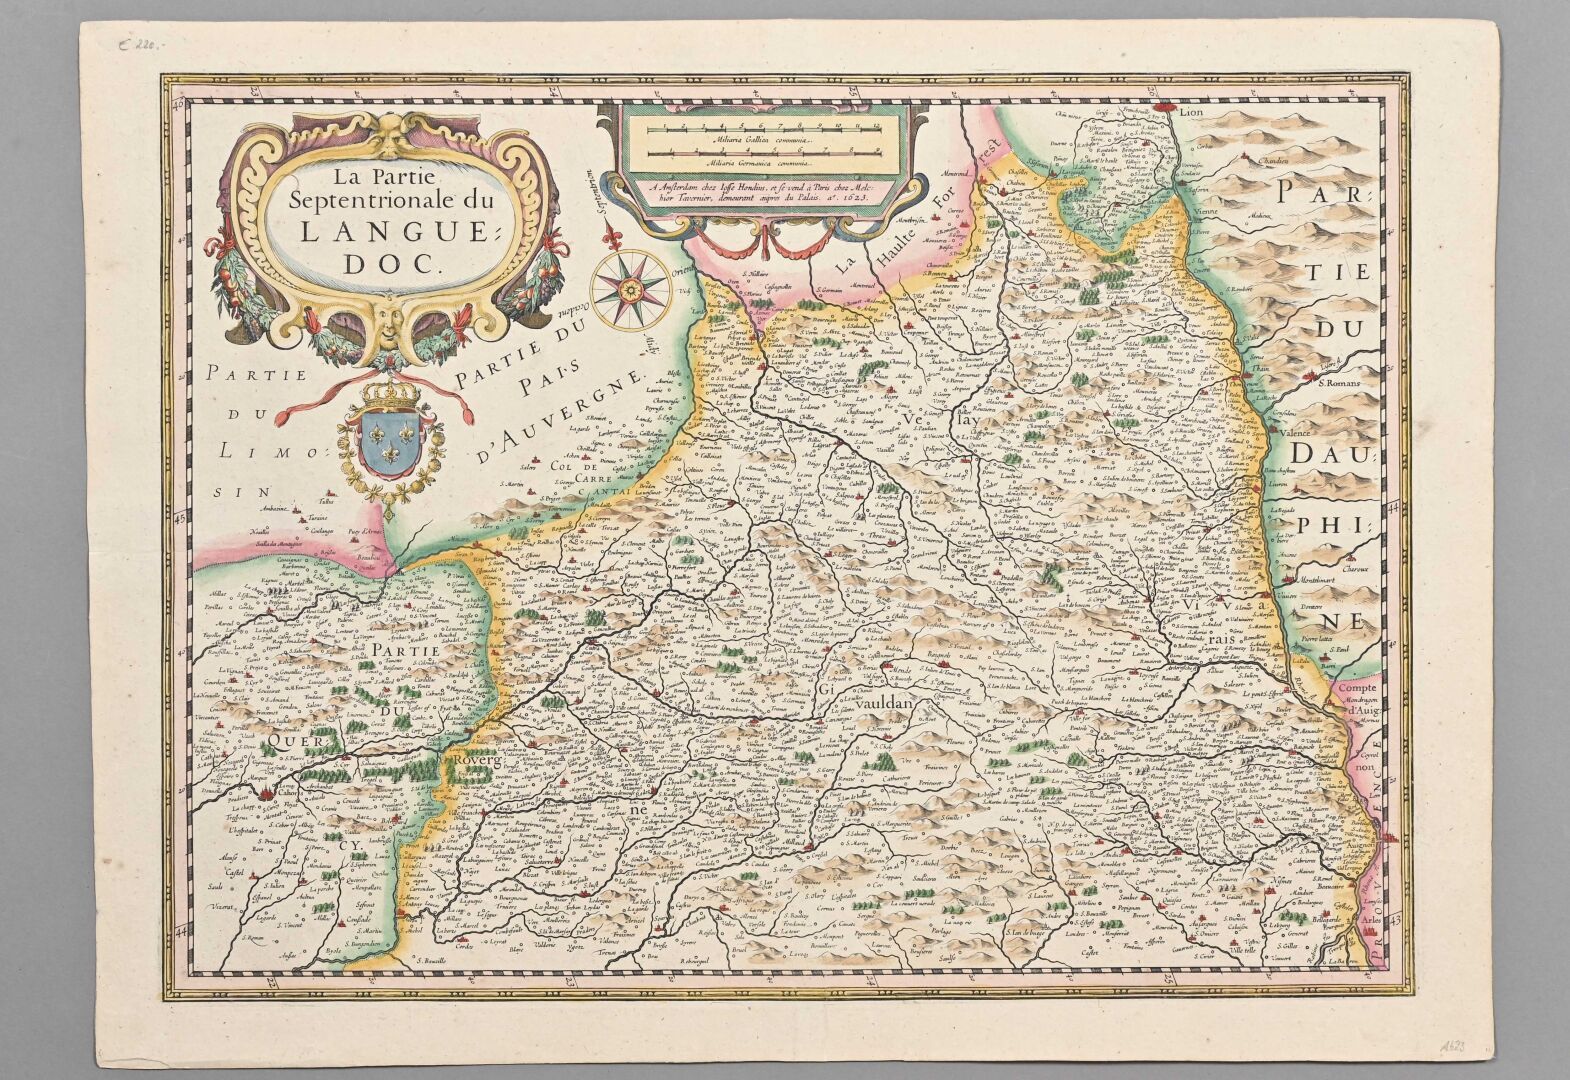 Null Johannes BLAEU (1650-1712)

Map of the northern part of Languedoc.

Modern &hellip;